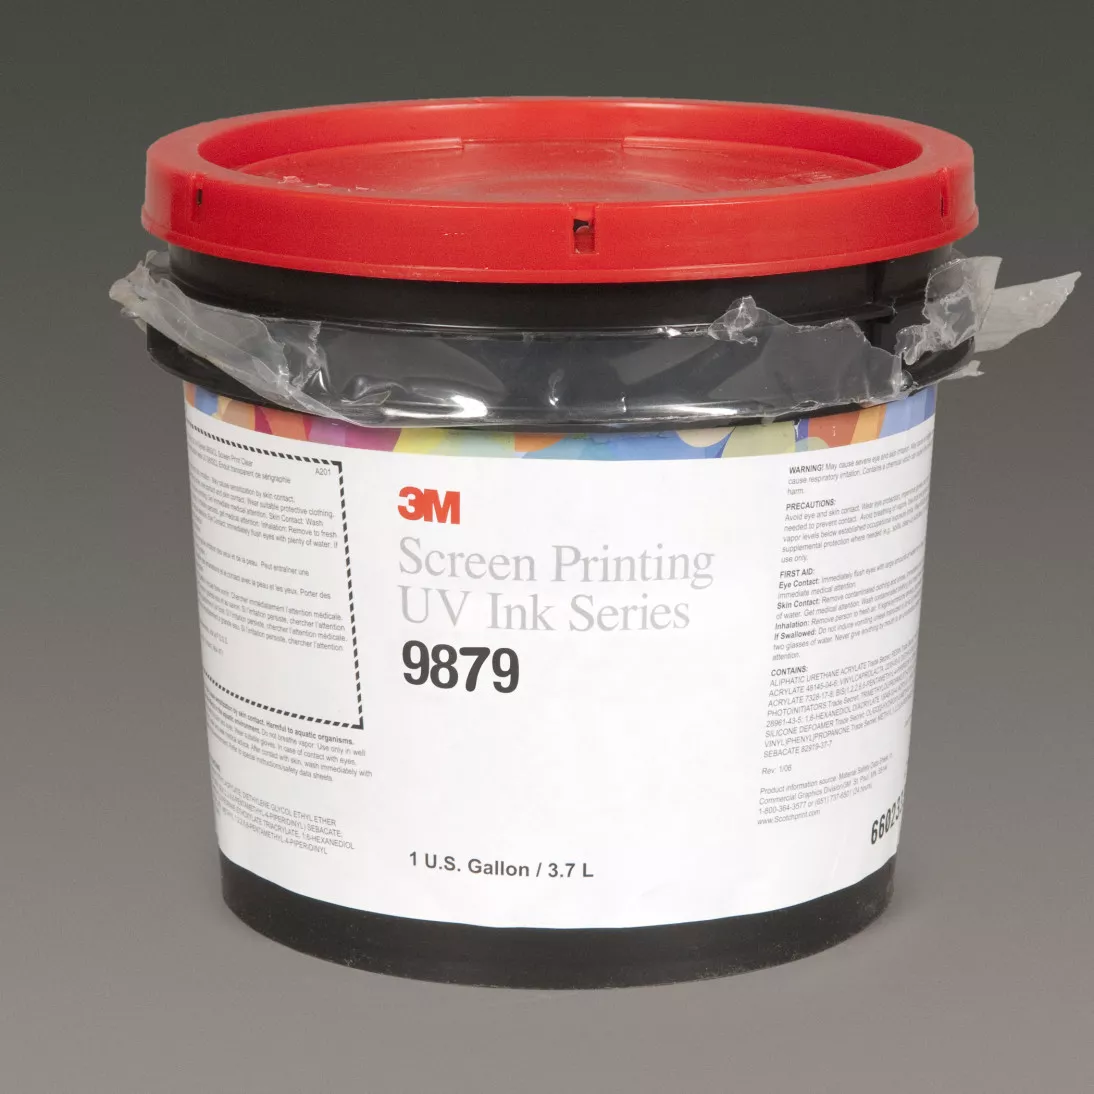 3M™ Screen Printing UV Ink 9879, Blue (GS), 1 Gallon Container